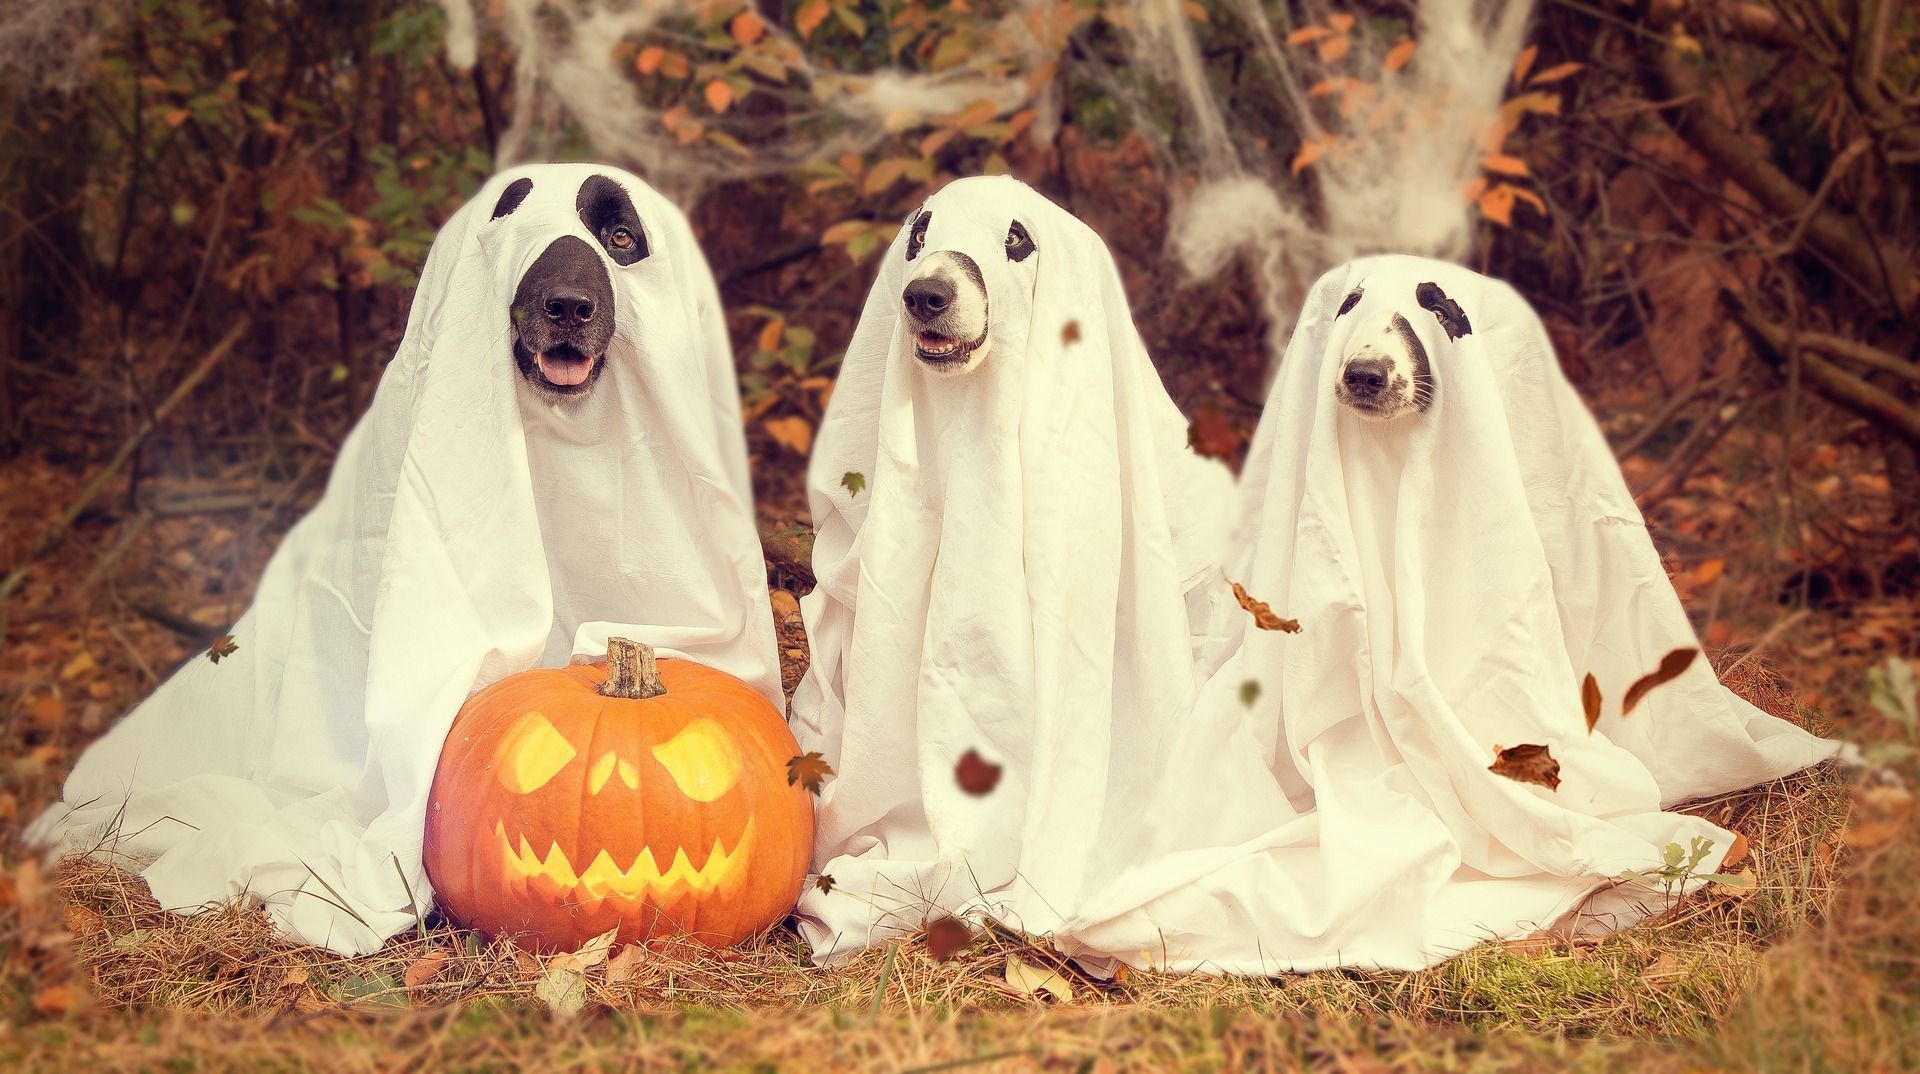 Three dogs wearing sheets that make them look like ghosts, with a pumpkin in front of them